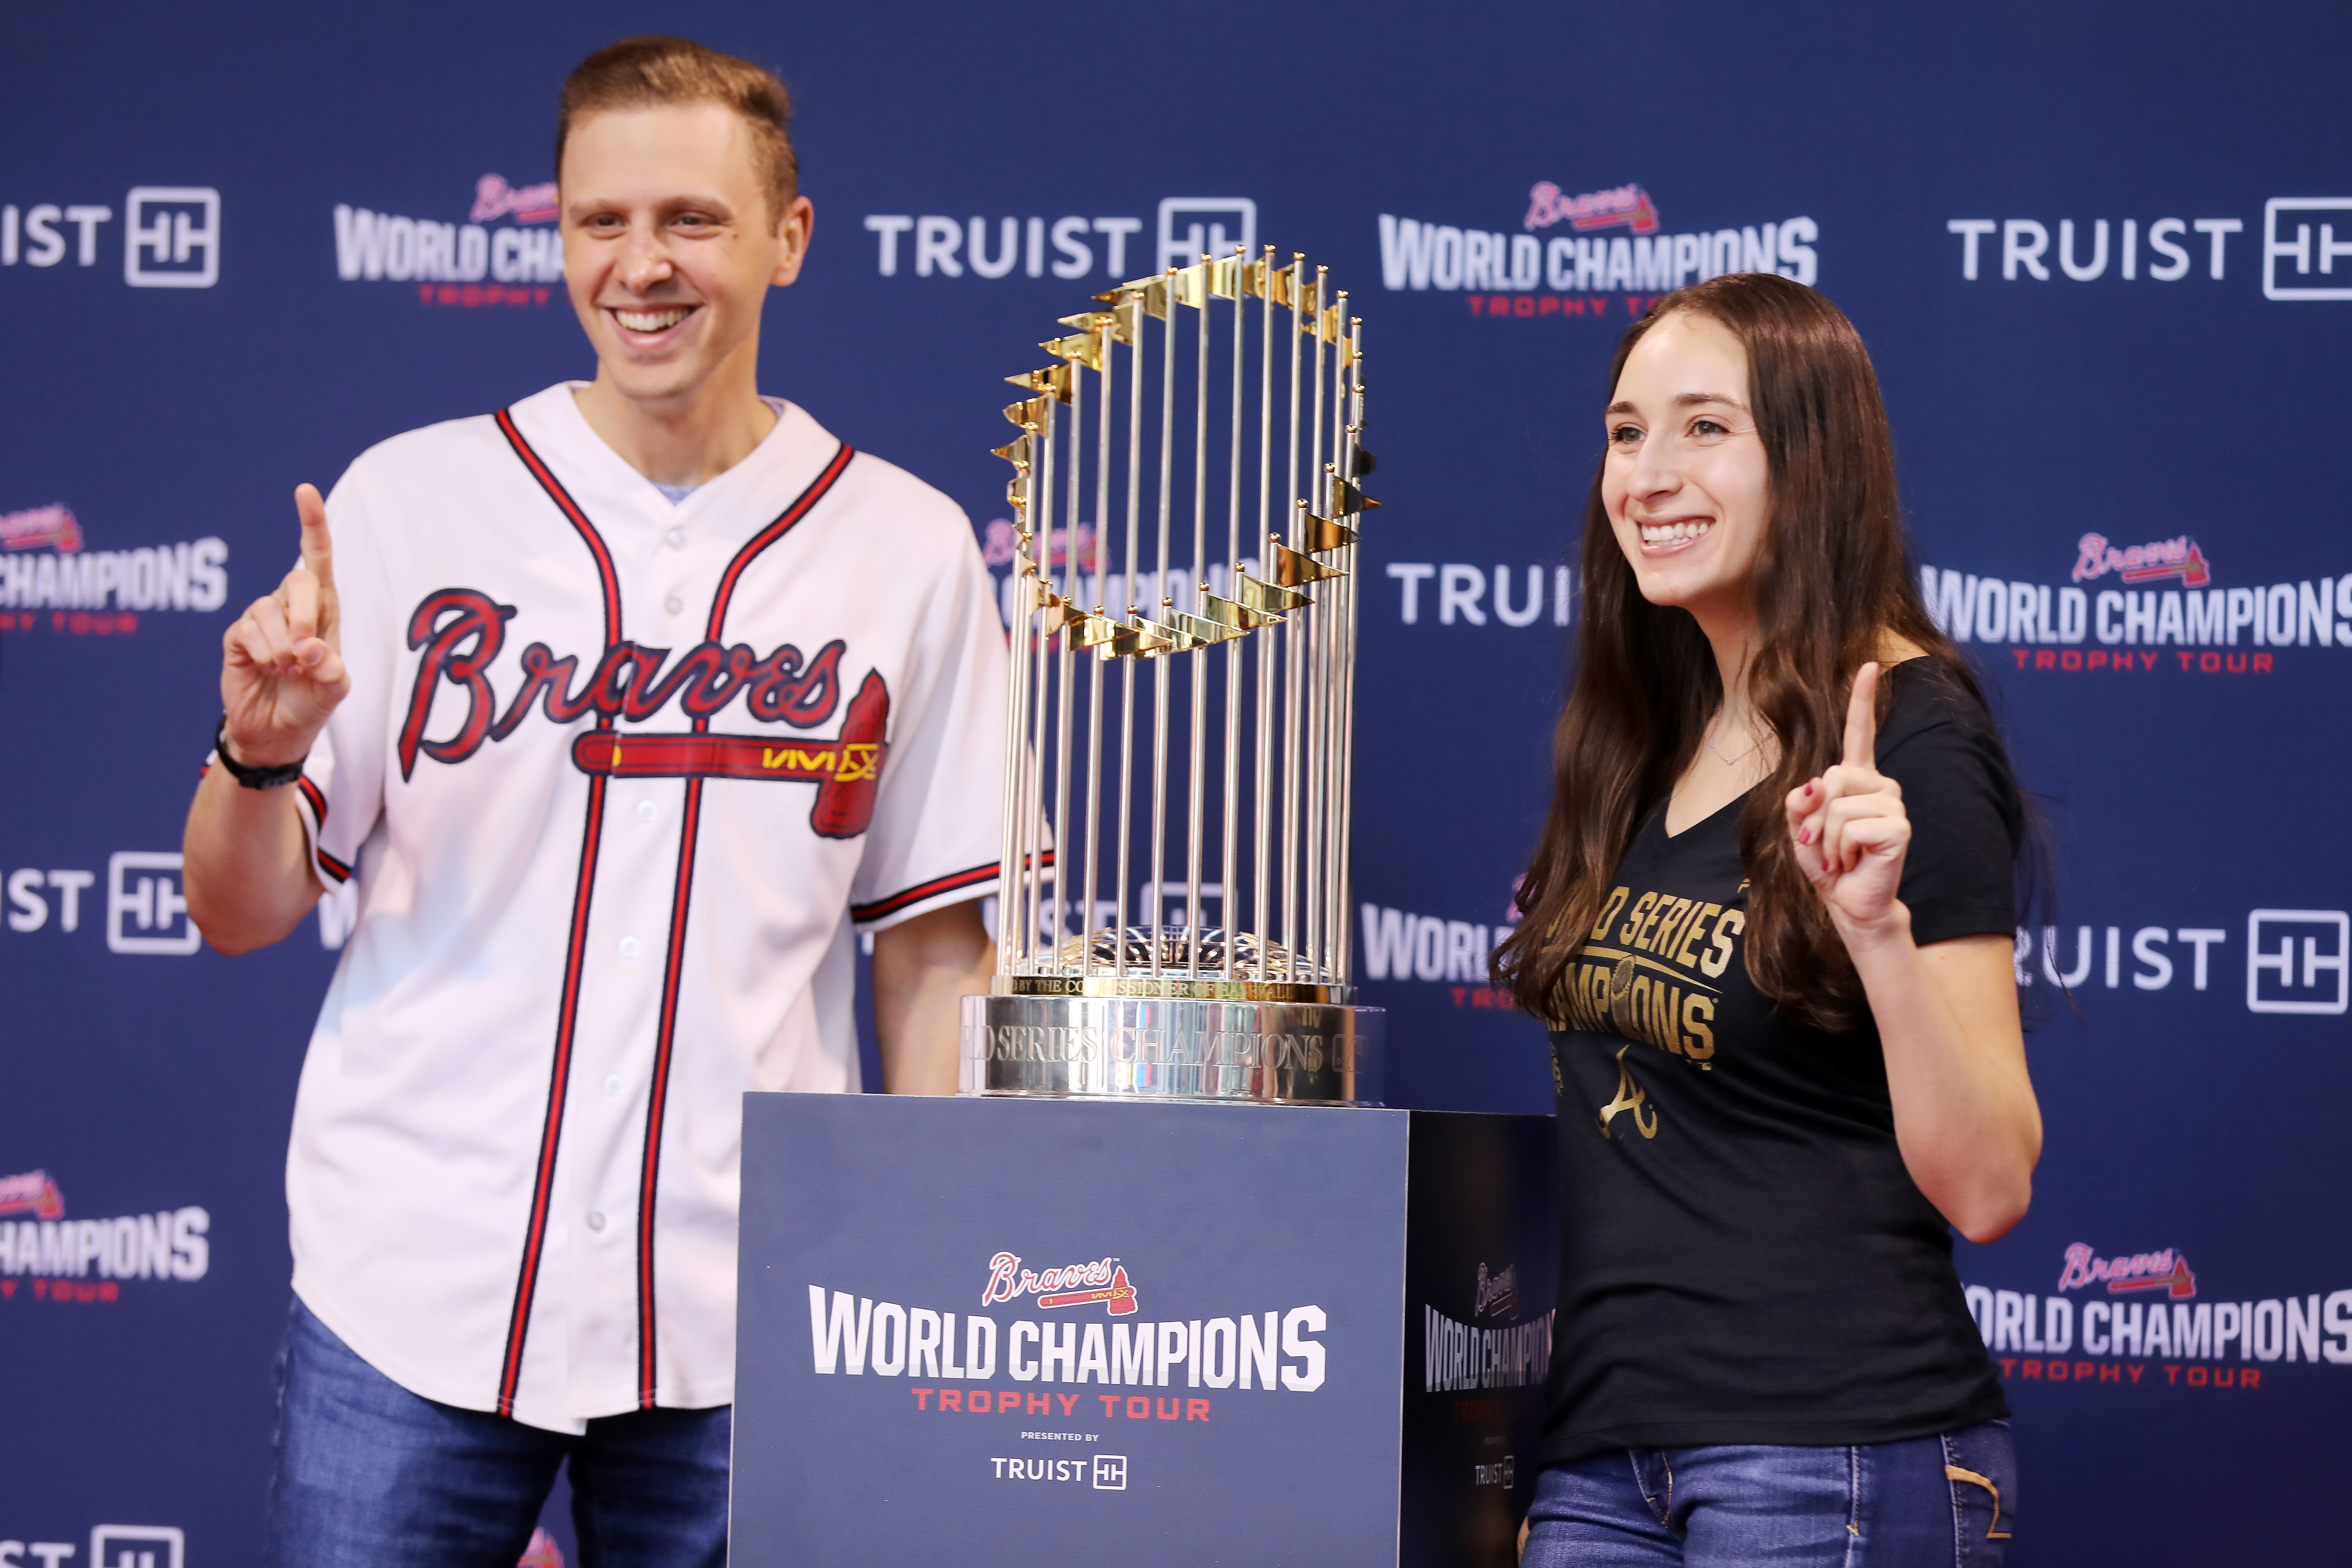 Atlanta Braves 2021 World Series trophy to make stop in Tallahassee